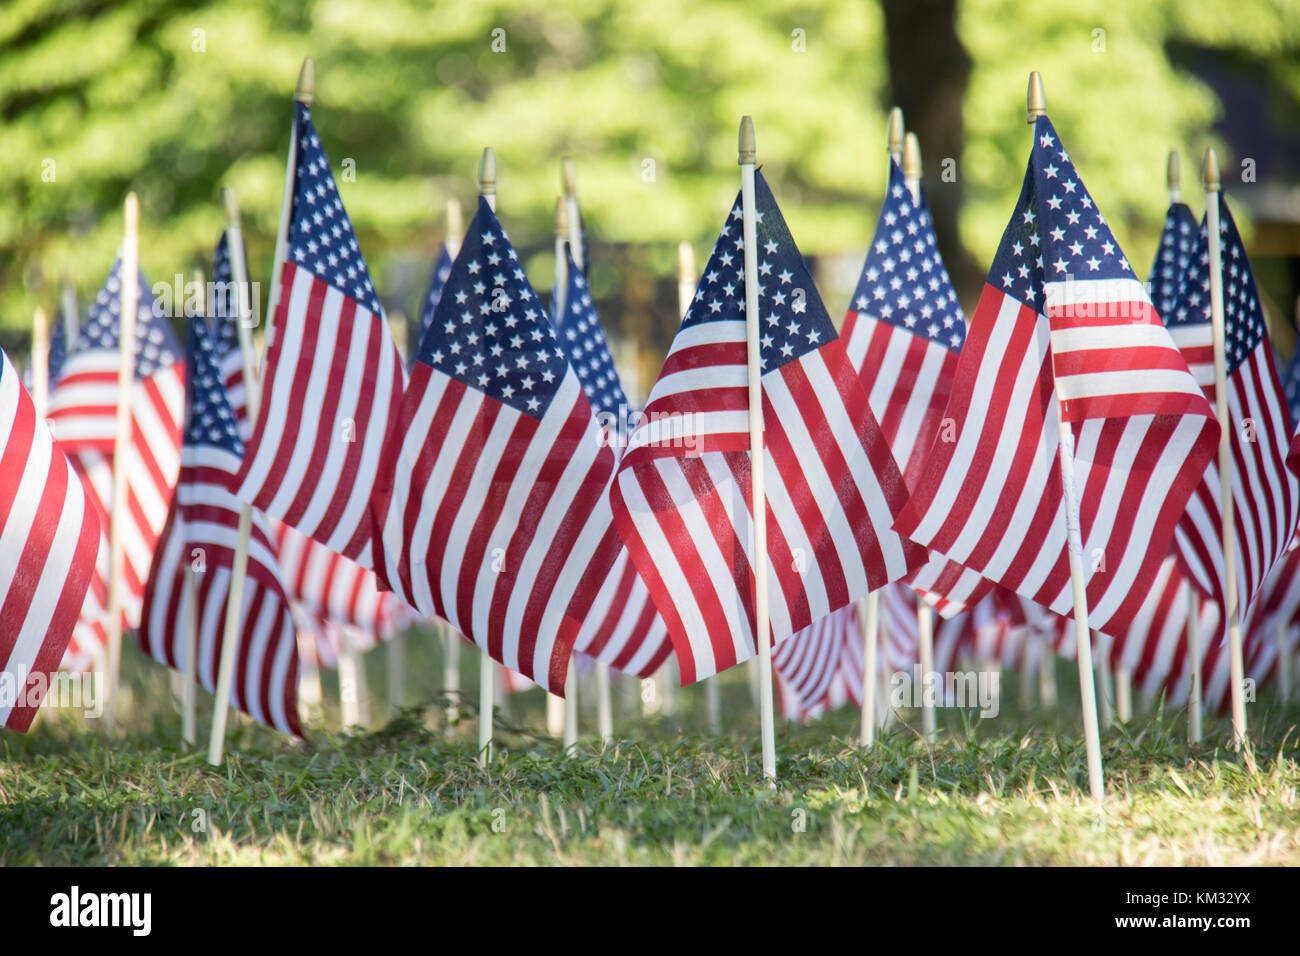 Field of American flags displayed on the lawn Stock Photo